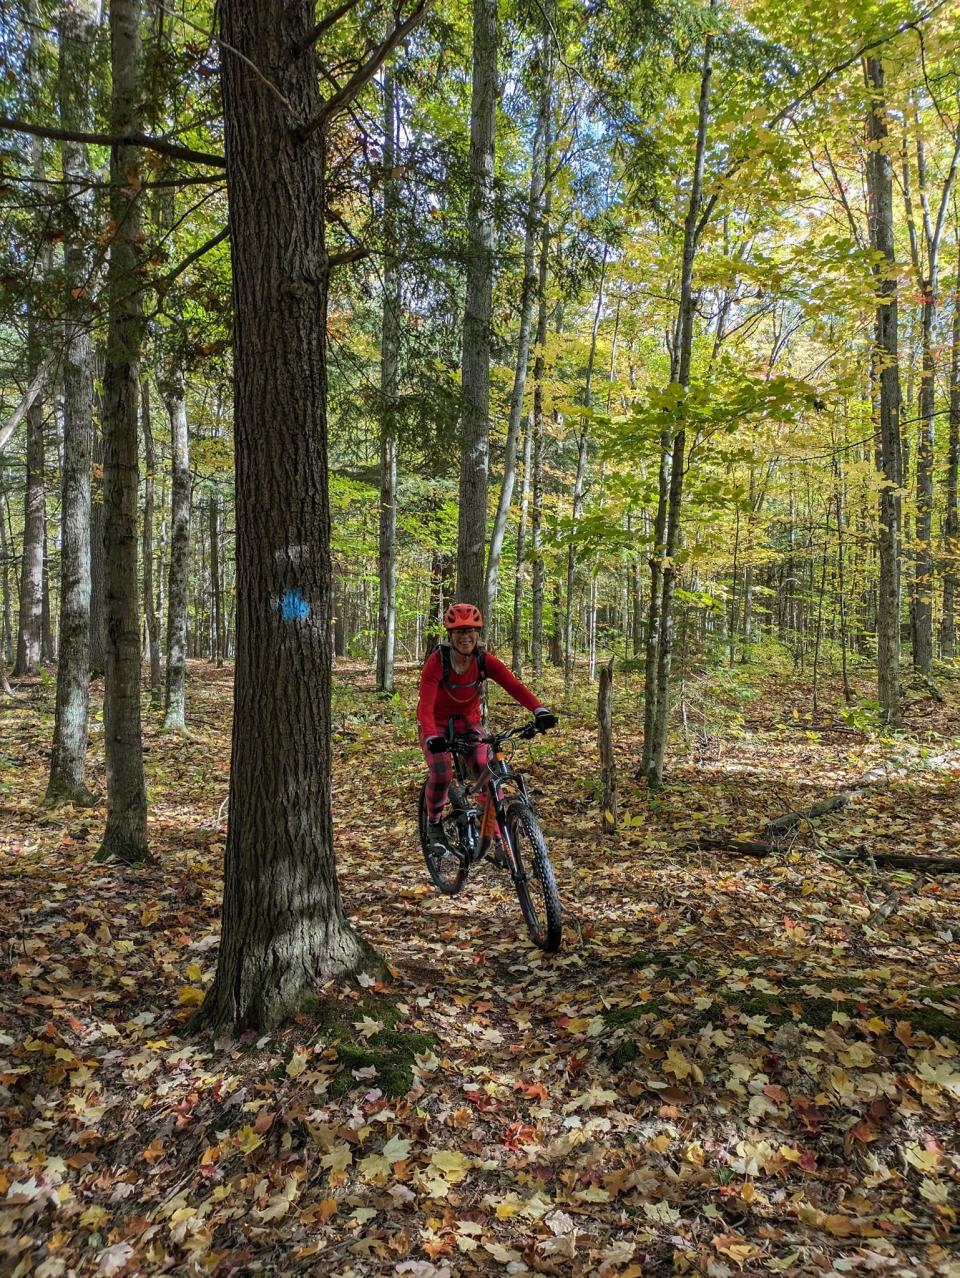 A new partnership between the Top of Michigan Trails Council and the Friends of the High Country Pathway aims to increase awareness of the High Country Pathway, an 82-mile trail system that cuts through the heart of the Pigeon River Country in Montmorency and Otsego counties. Here a mountain biker navigates the trail near Round Lake.